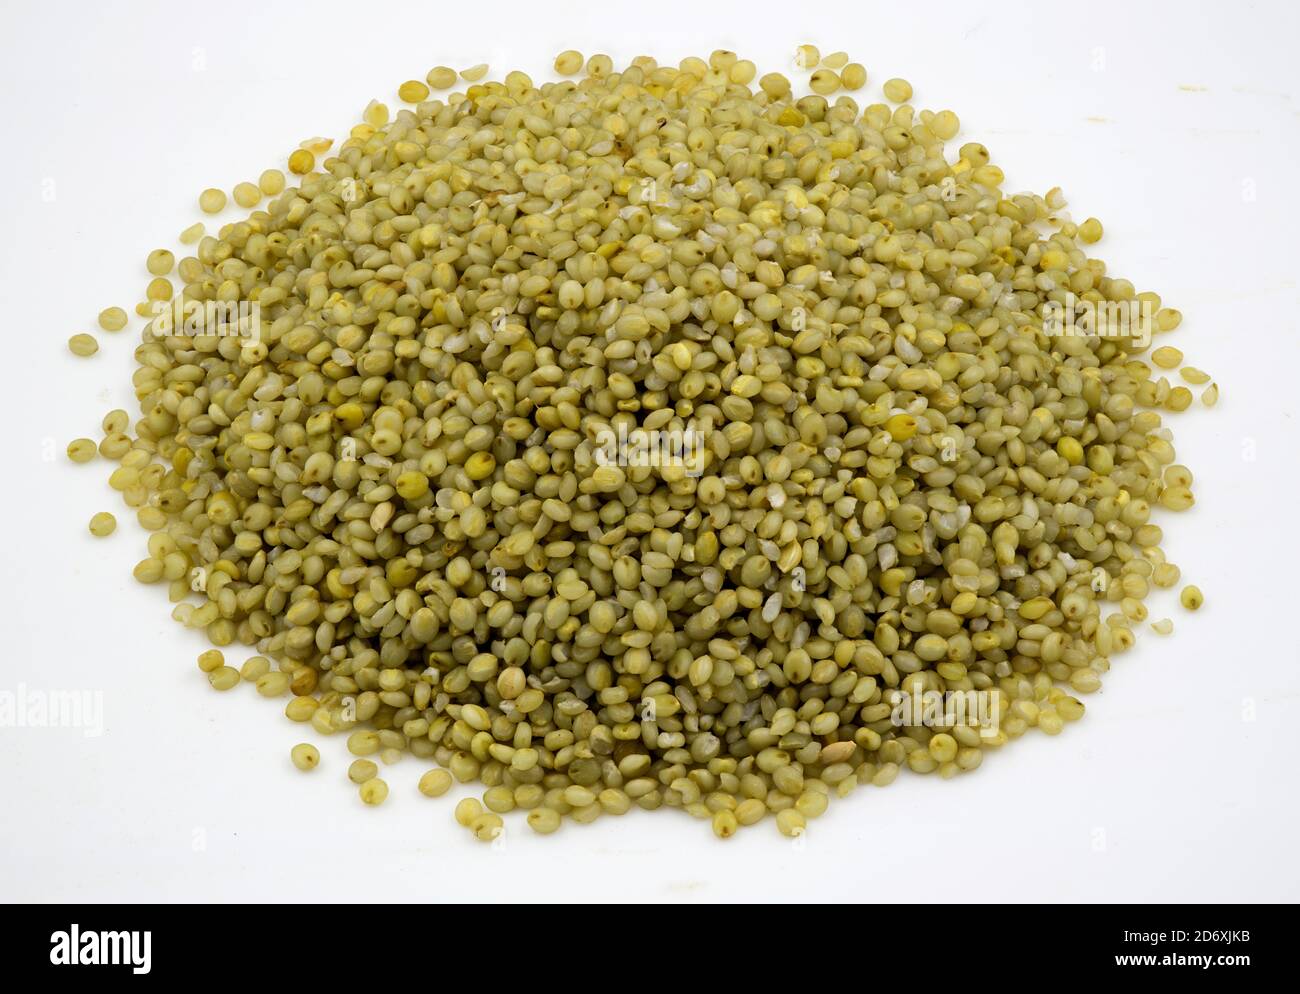 Close-up of browntop millet grains on an isolated white background Stock Photo